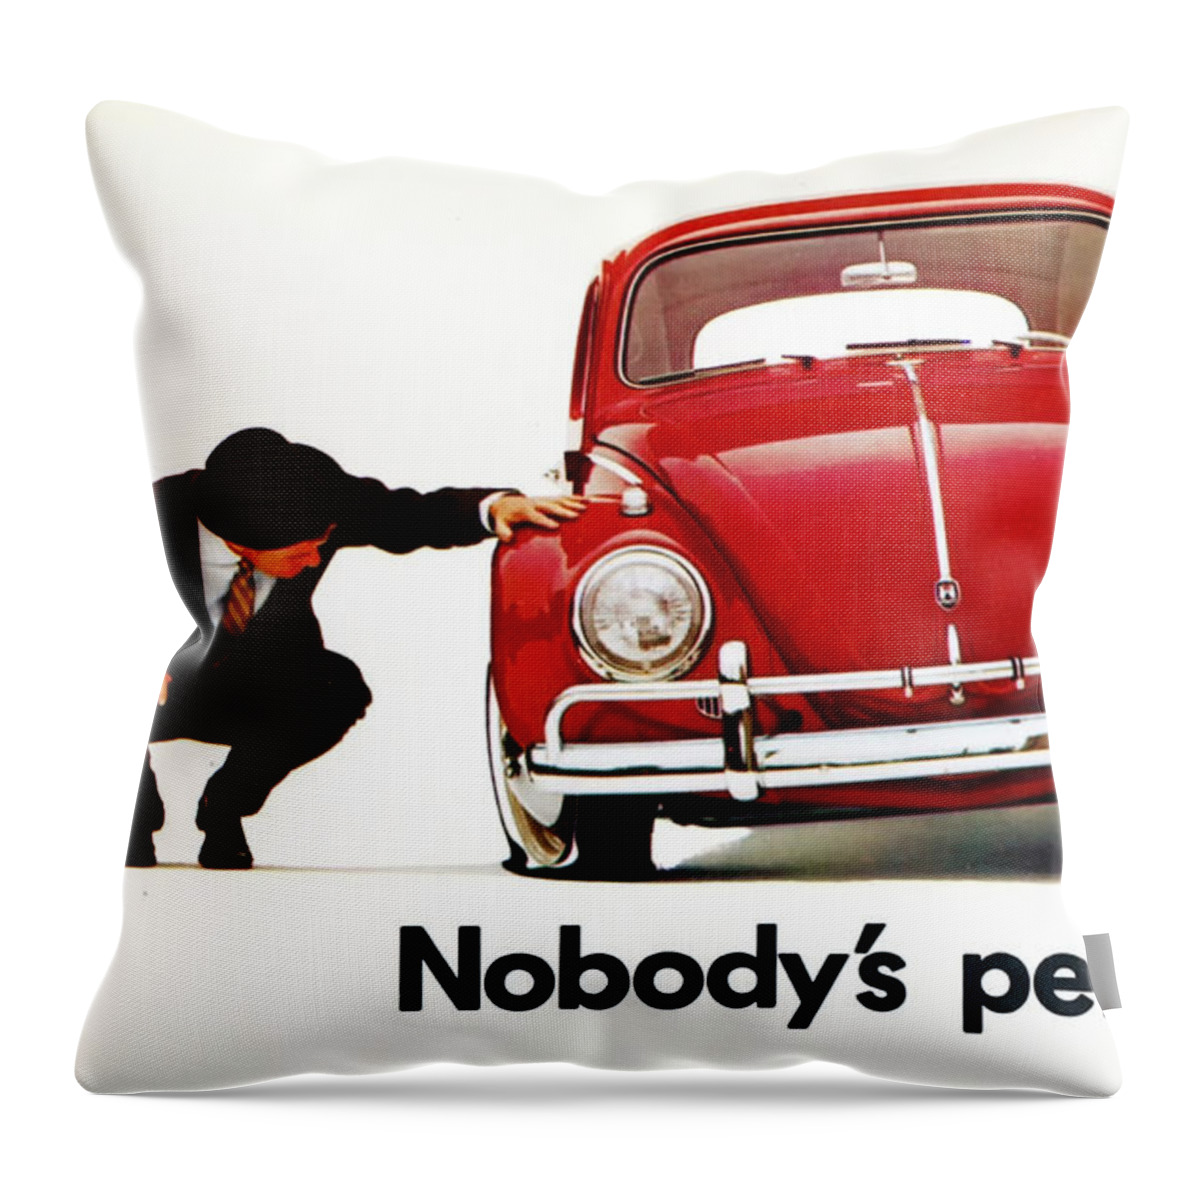 Nobodys Perfect Throw Pillow featuring the digital art Nobodys Perfect - Volkswagen Beetle Ad by Georgia Fowler